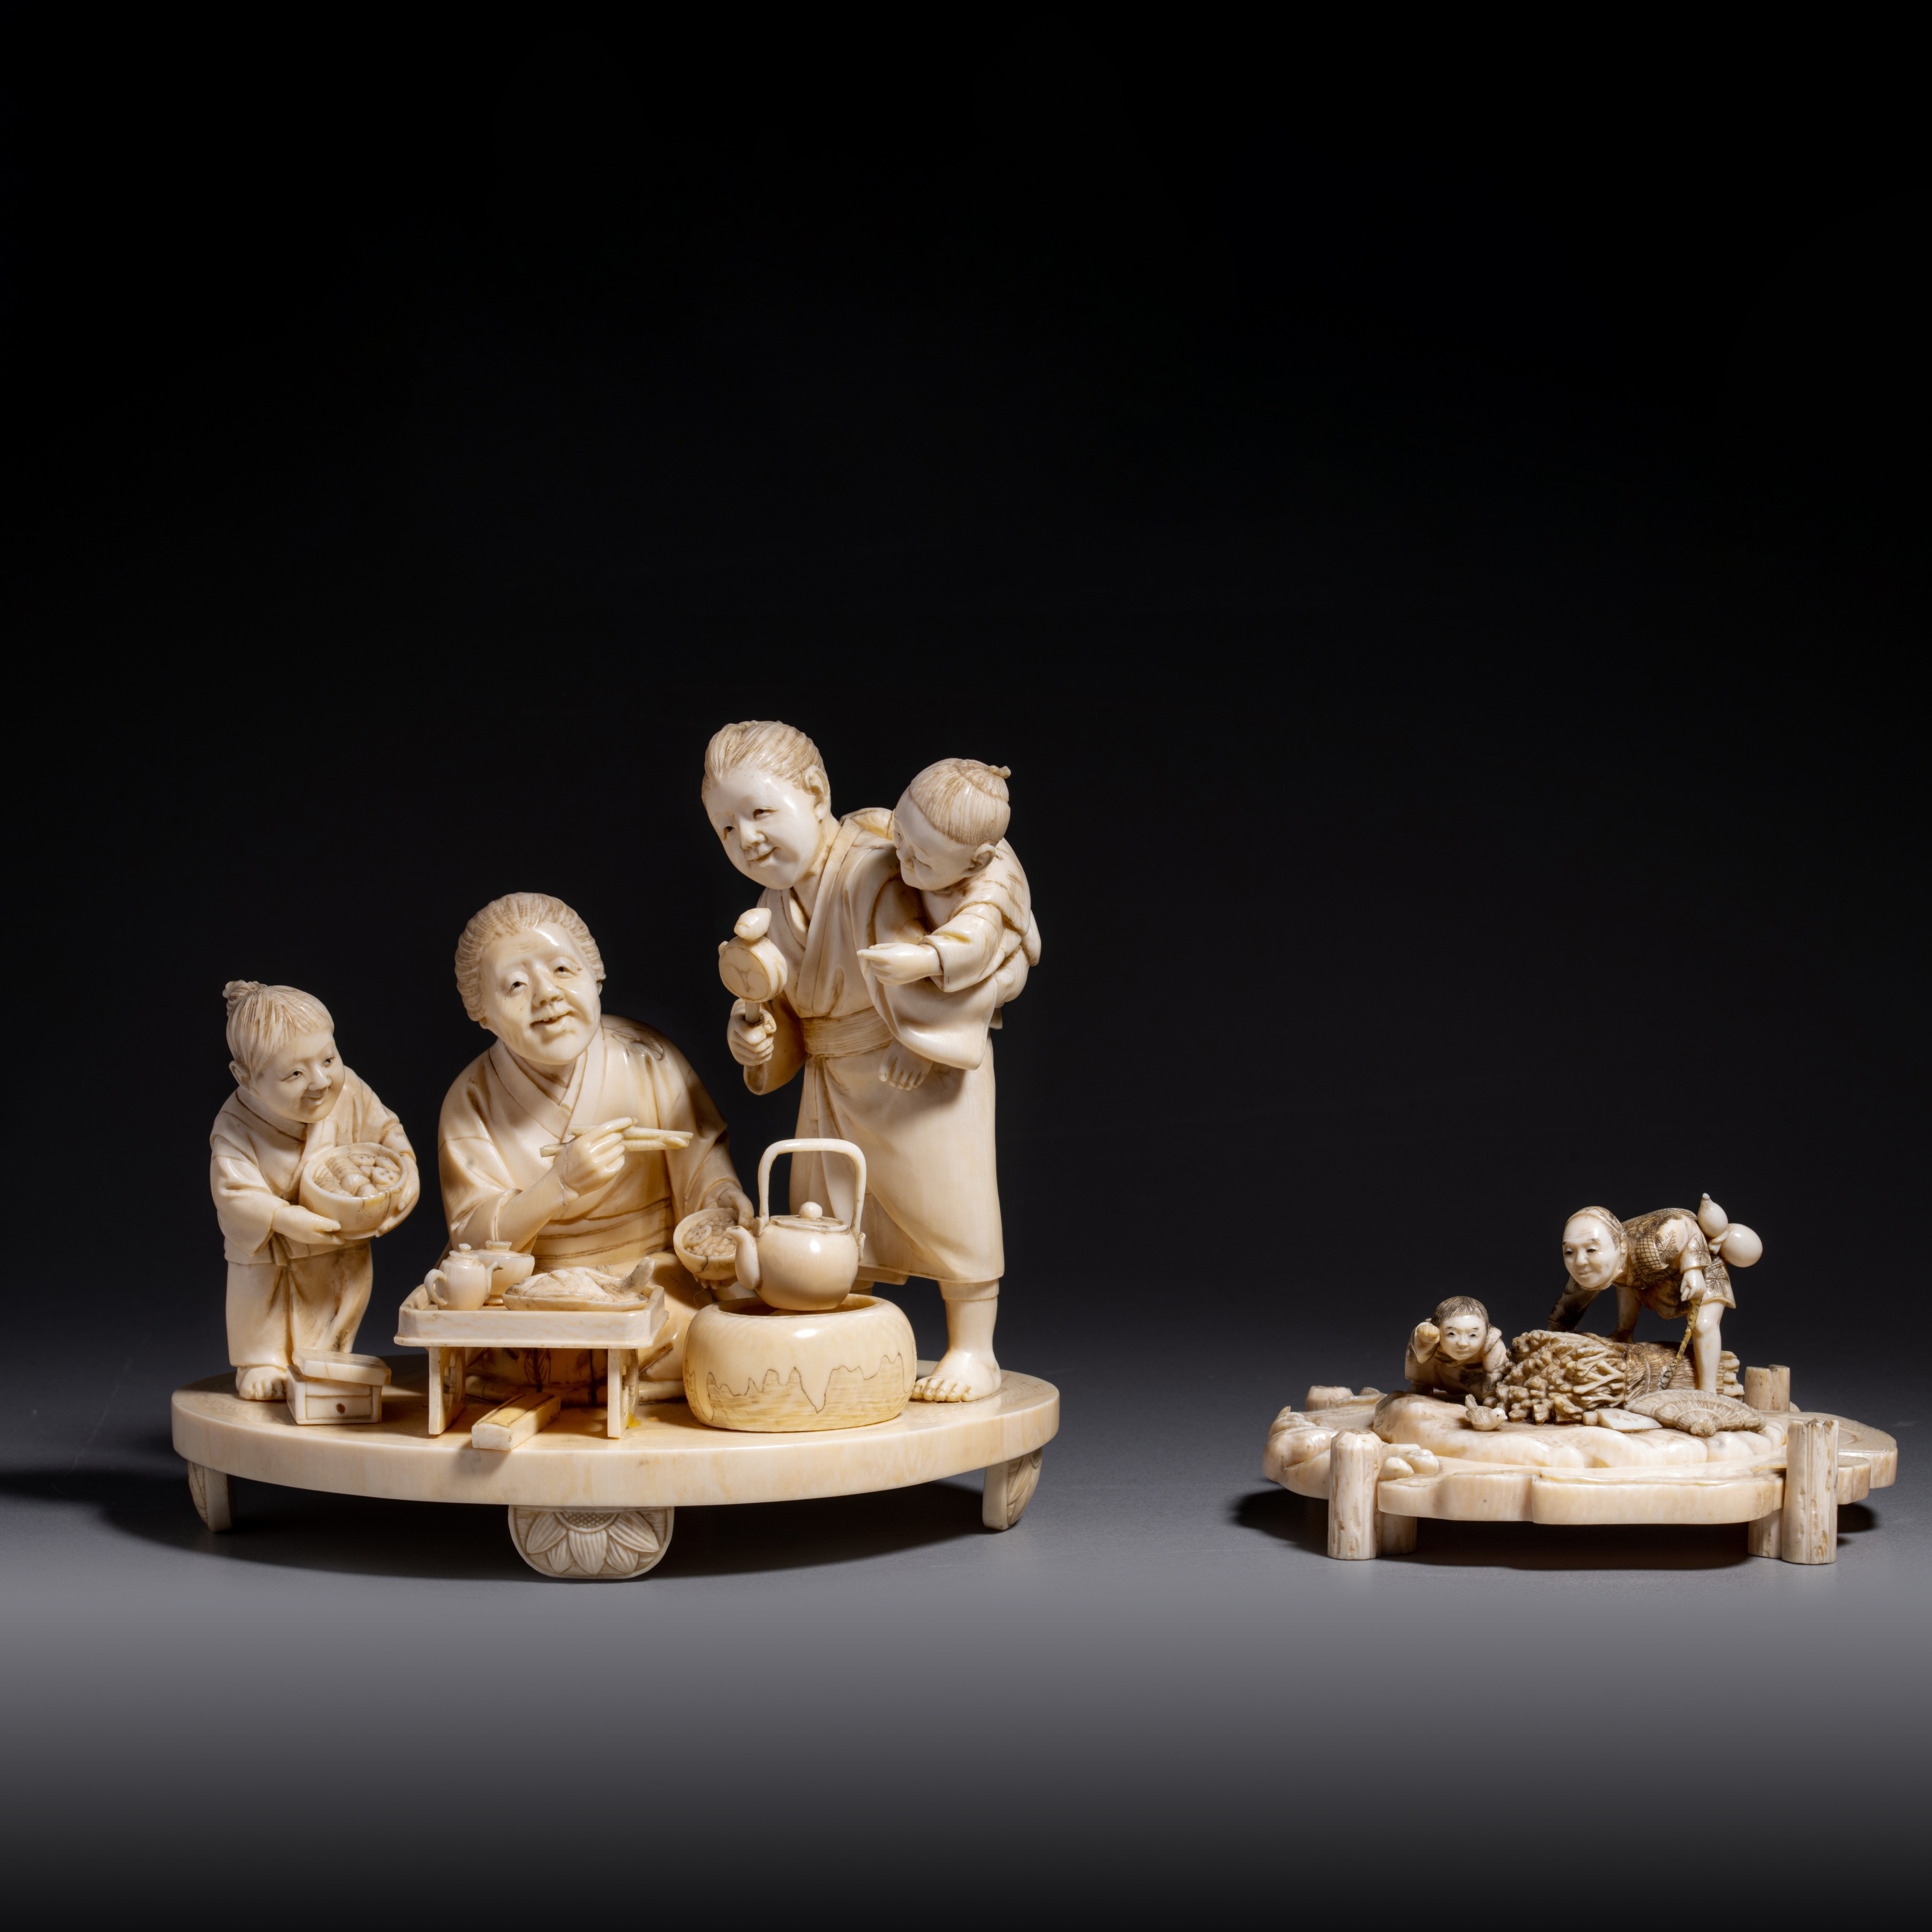 Two Japanese ivory animated scenes, H 12,4 cm - H 5,2 cm, 451g - 118g (+)